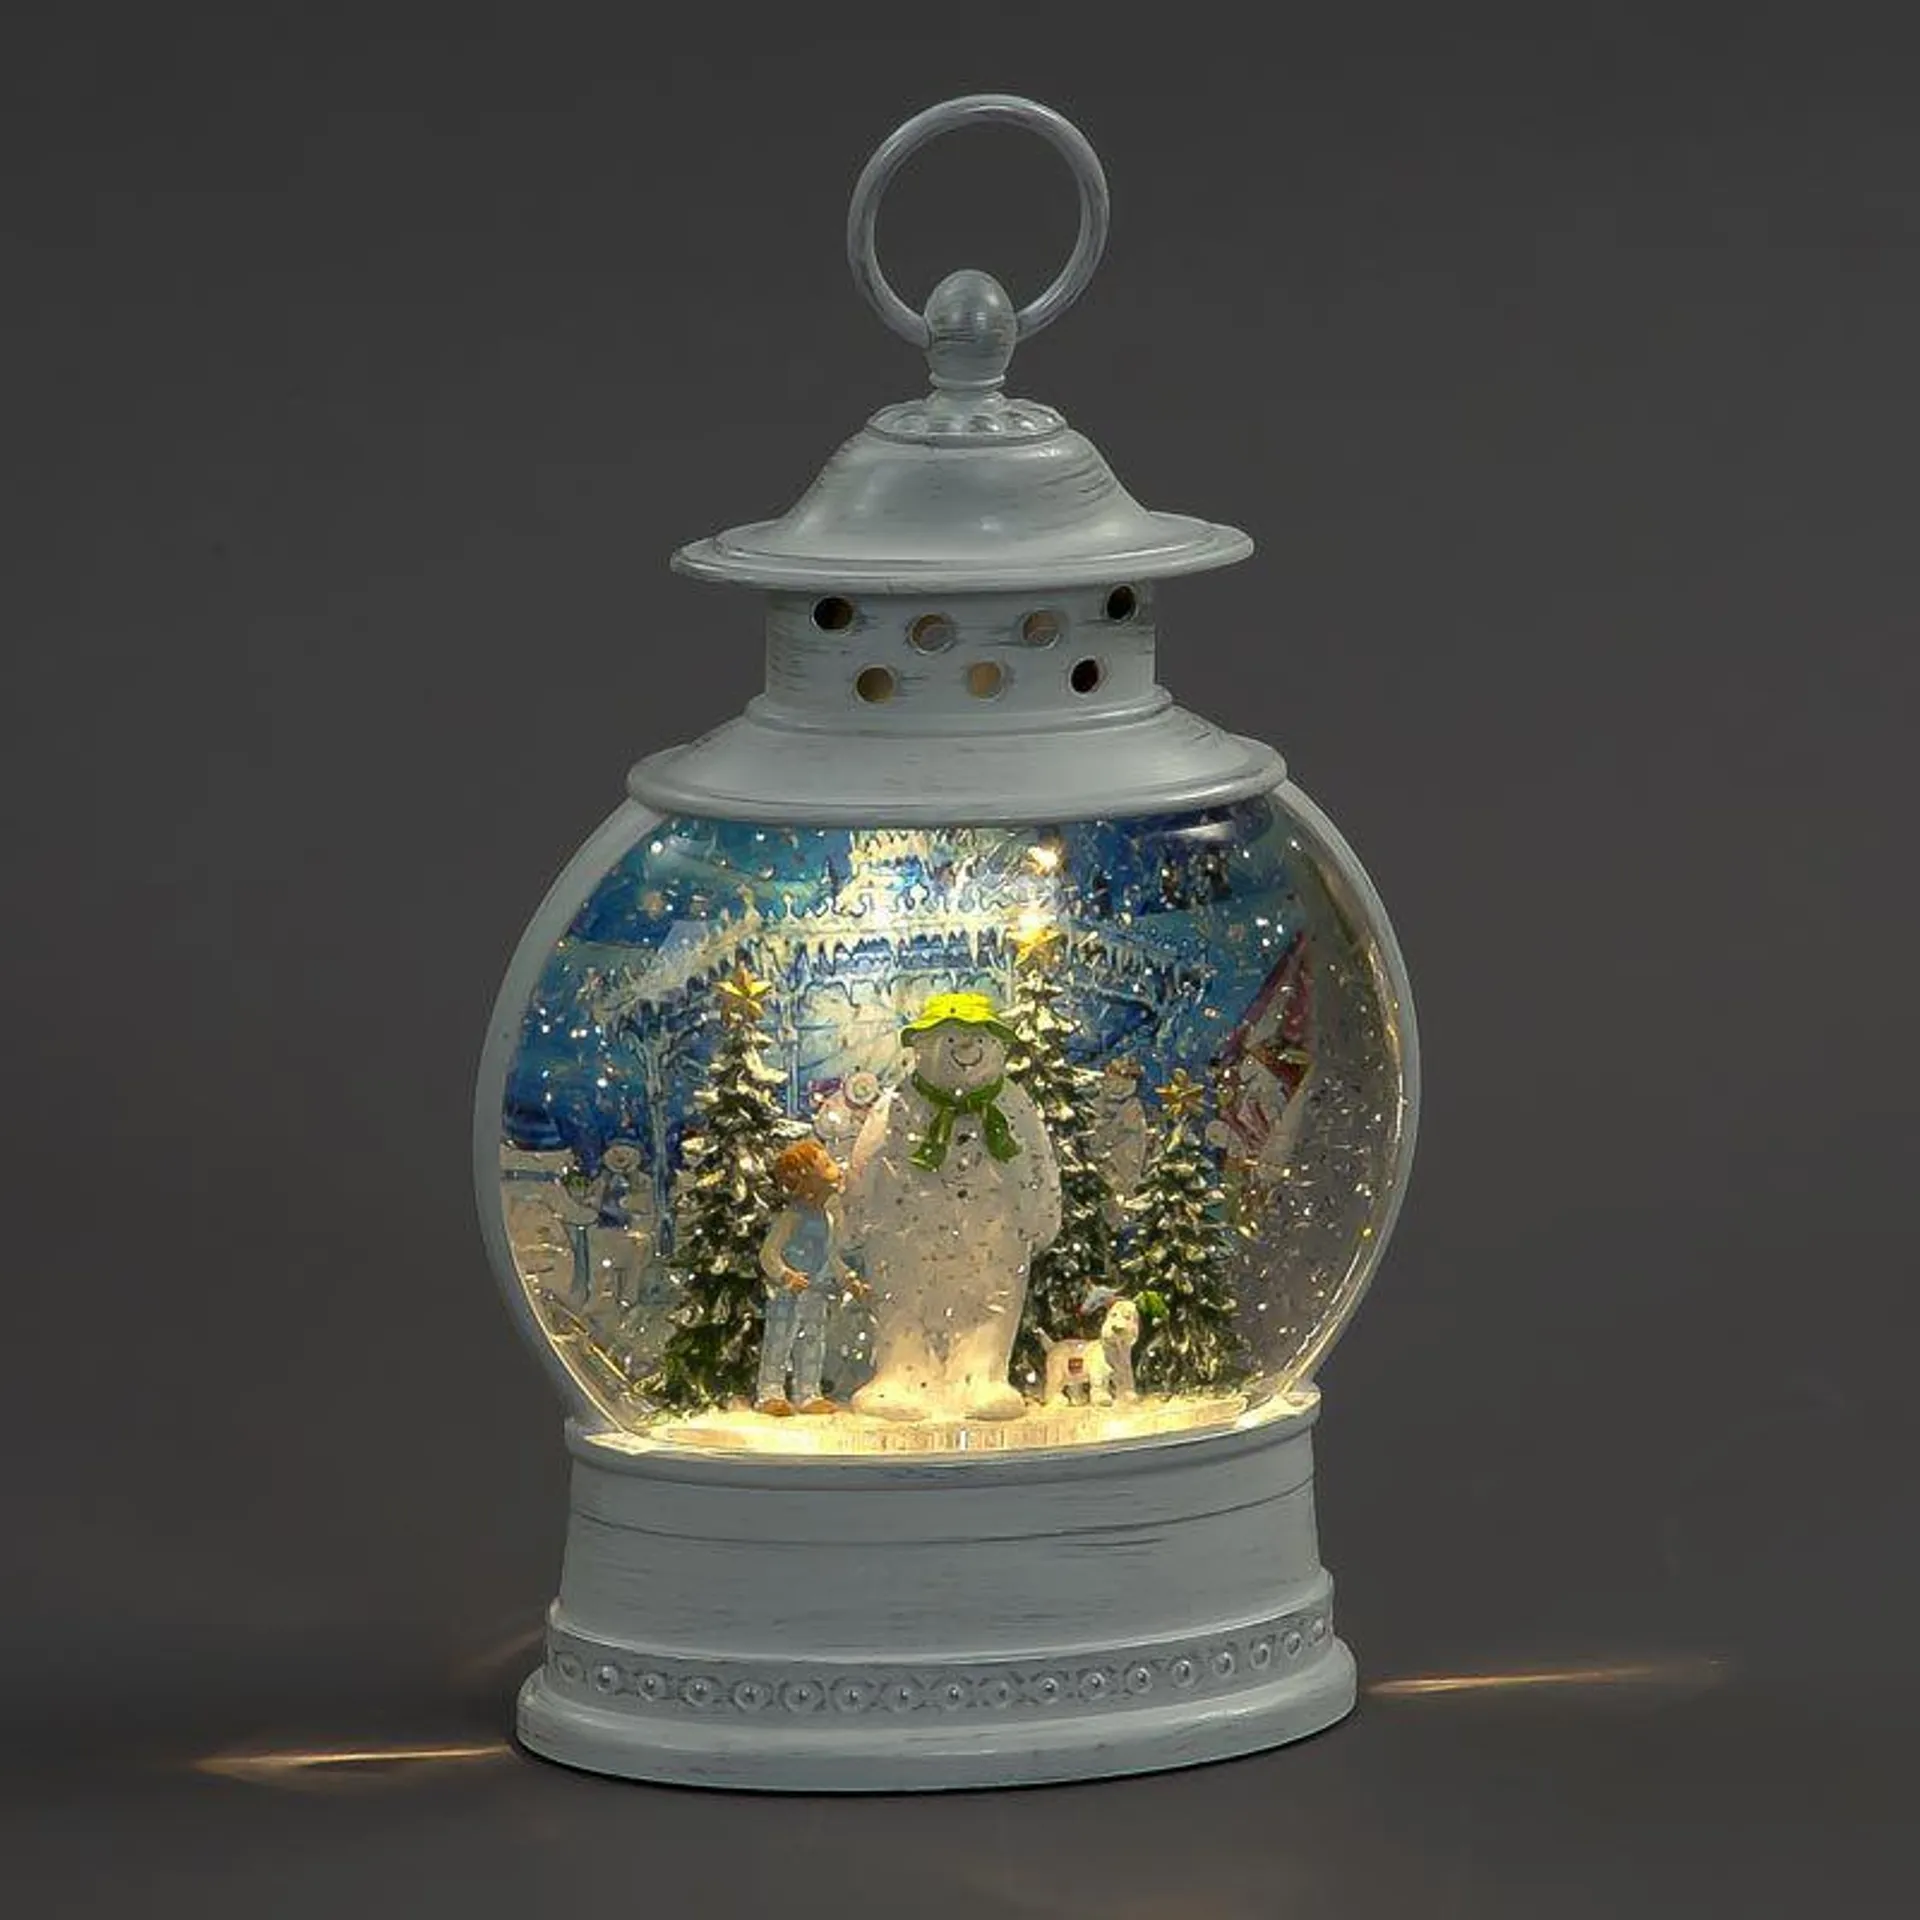 Battery Operated White Water Lantern with The Snowman, Snowdog and Billy